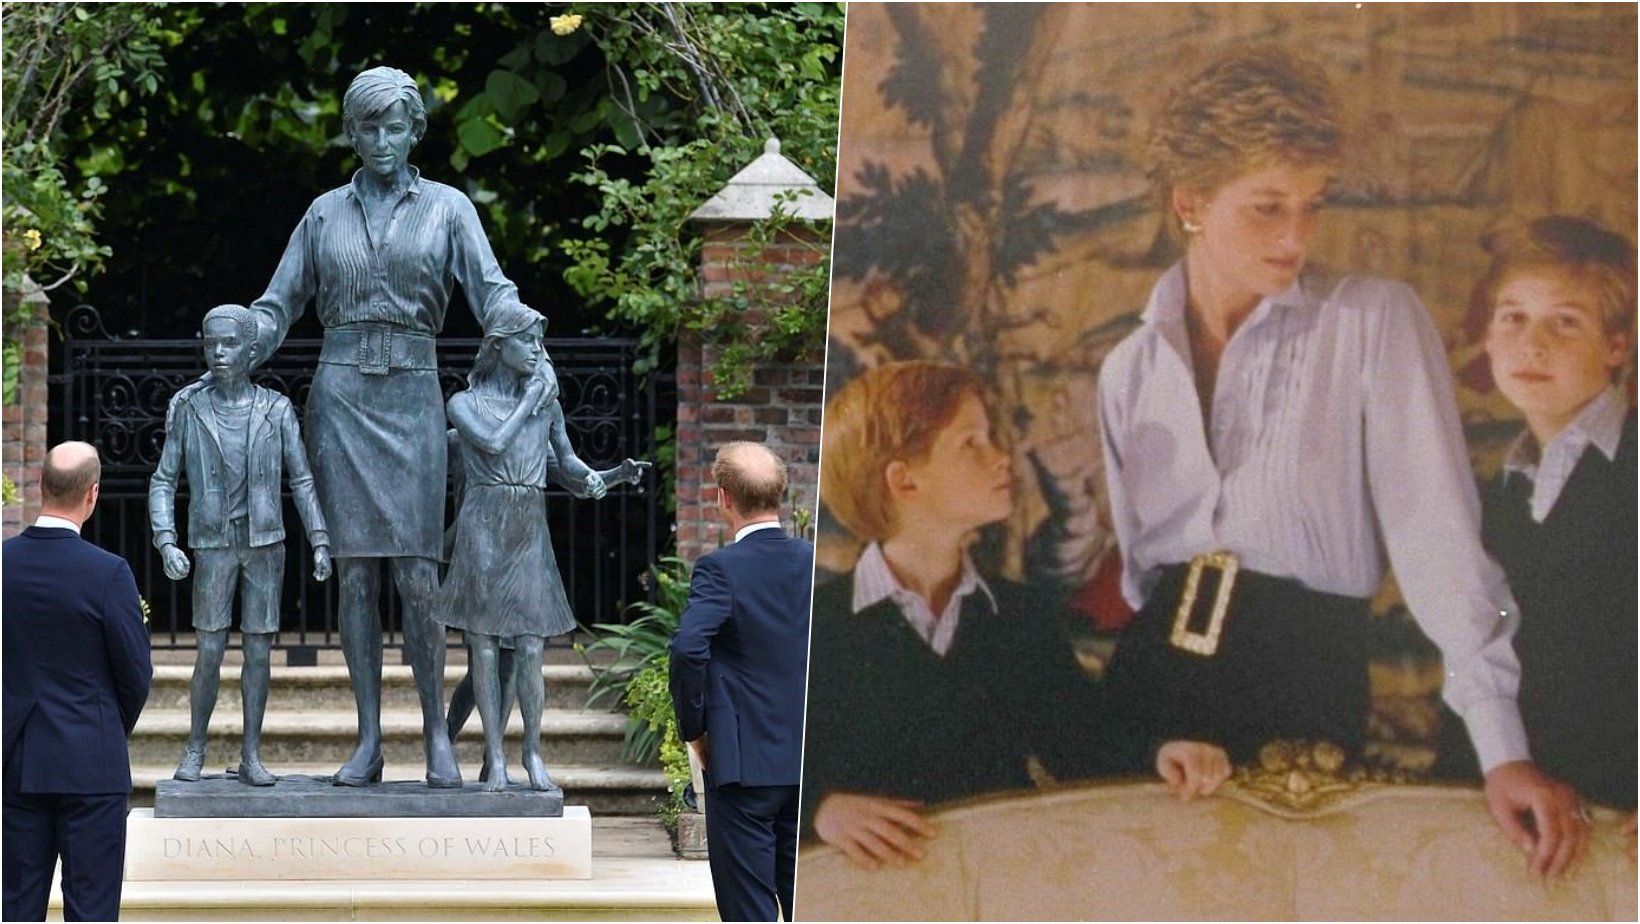 6 facebook cover 2.png?resize=1200,630 - Princess Diana Was Honored Through A Statue Inspired By A 1993 Christmas Card